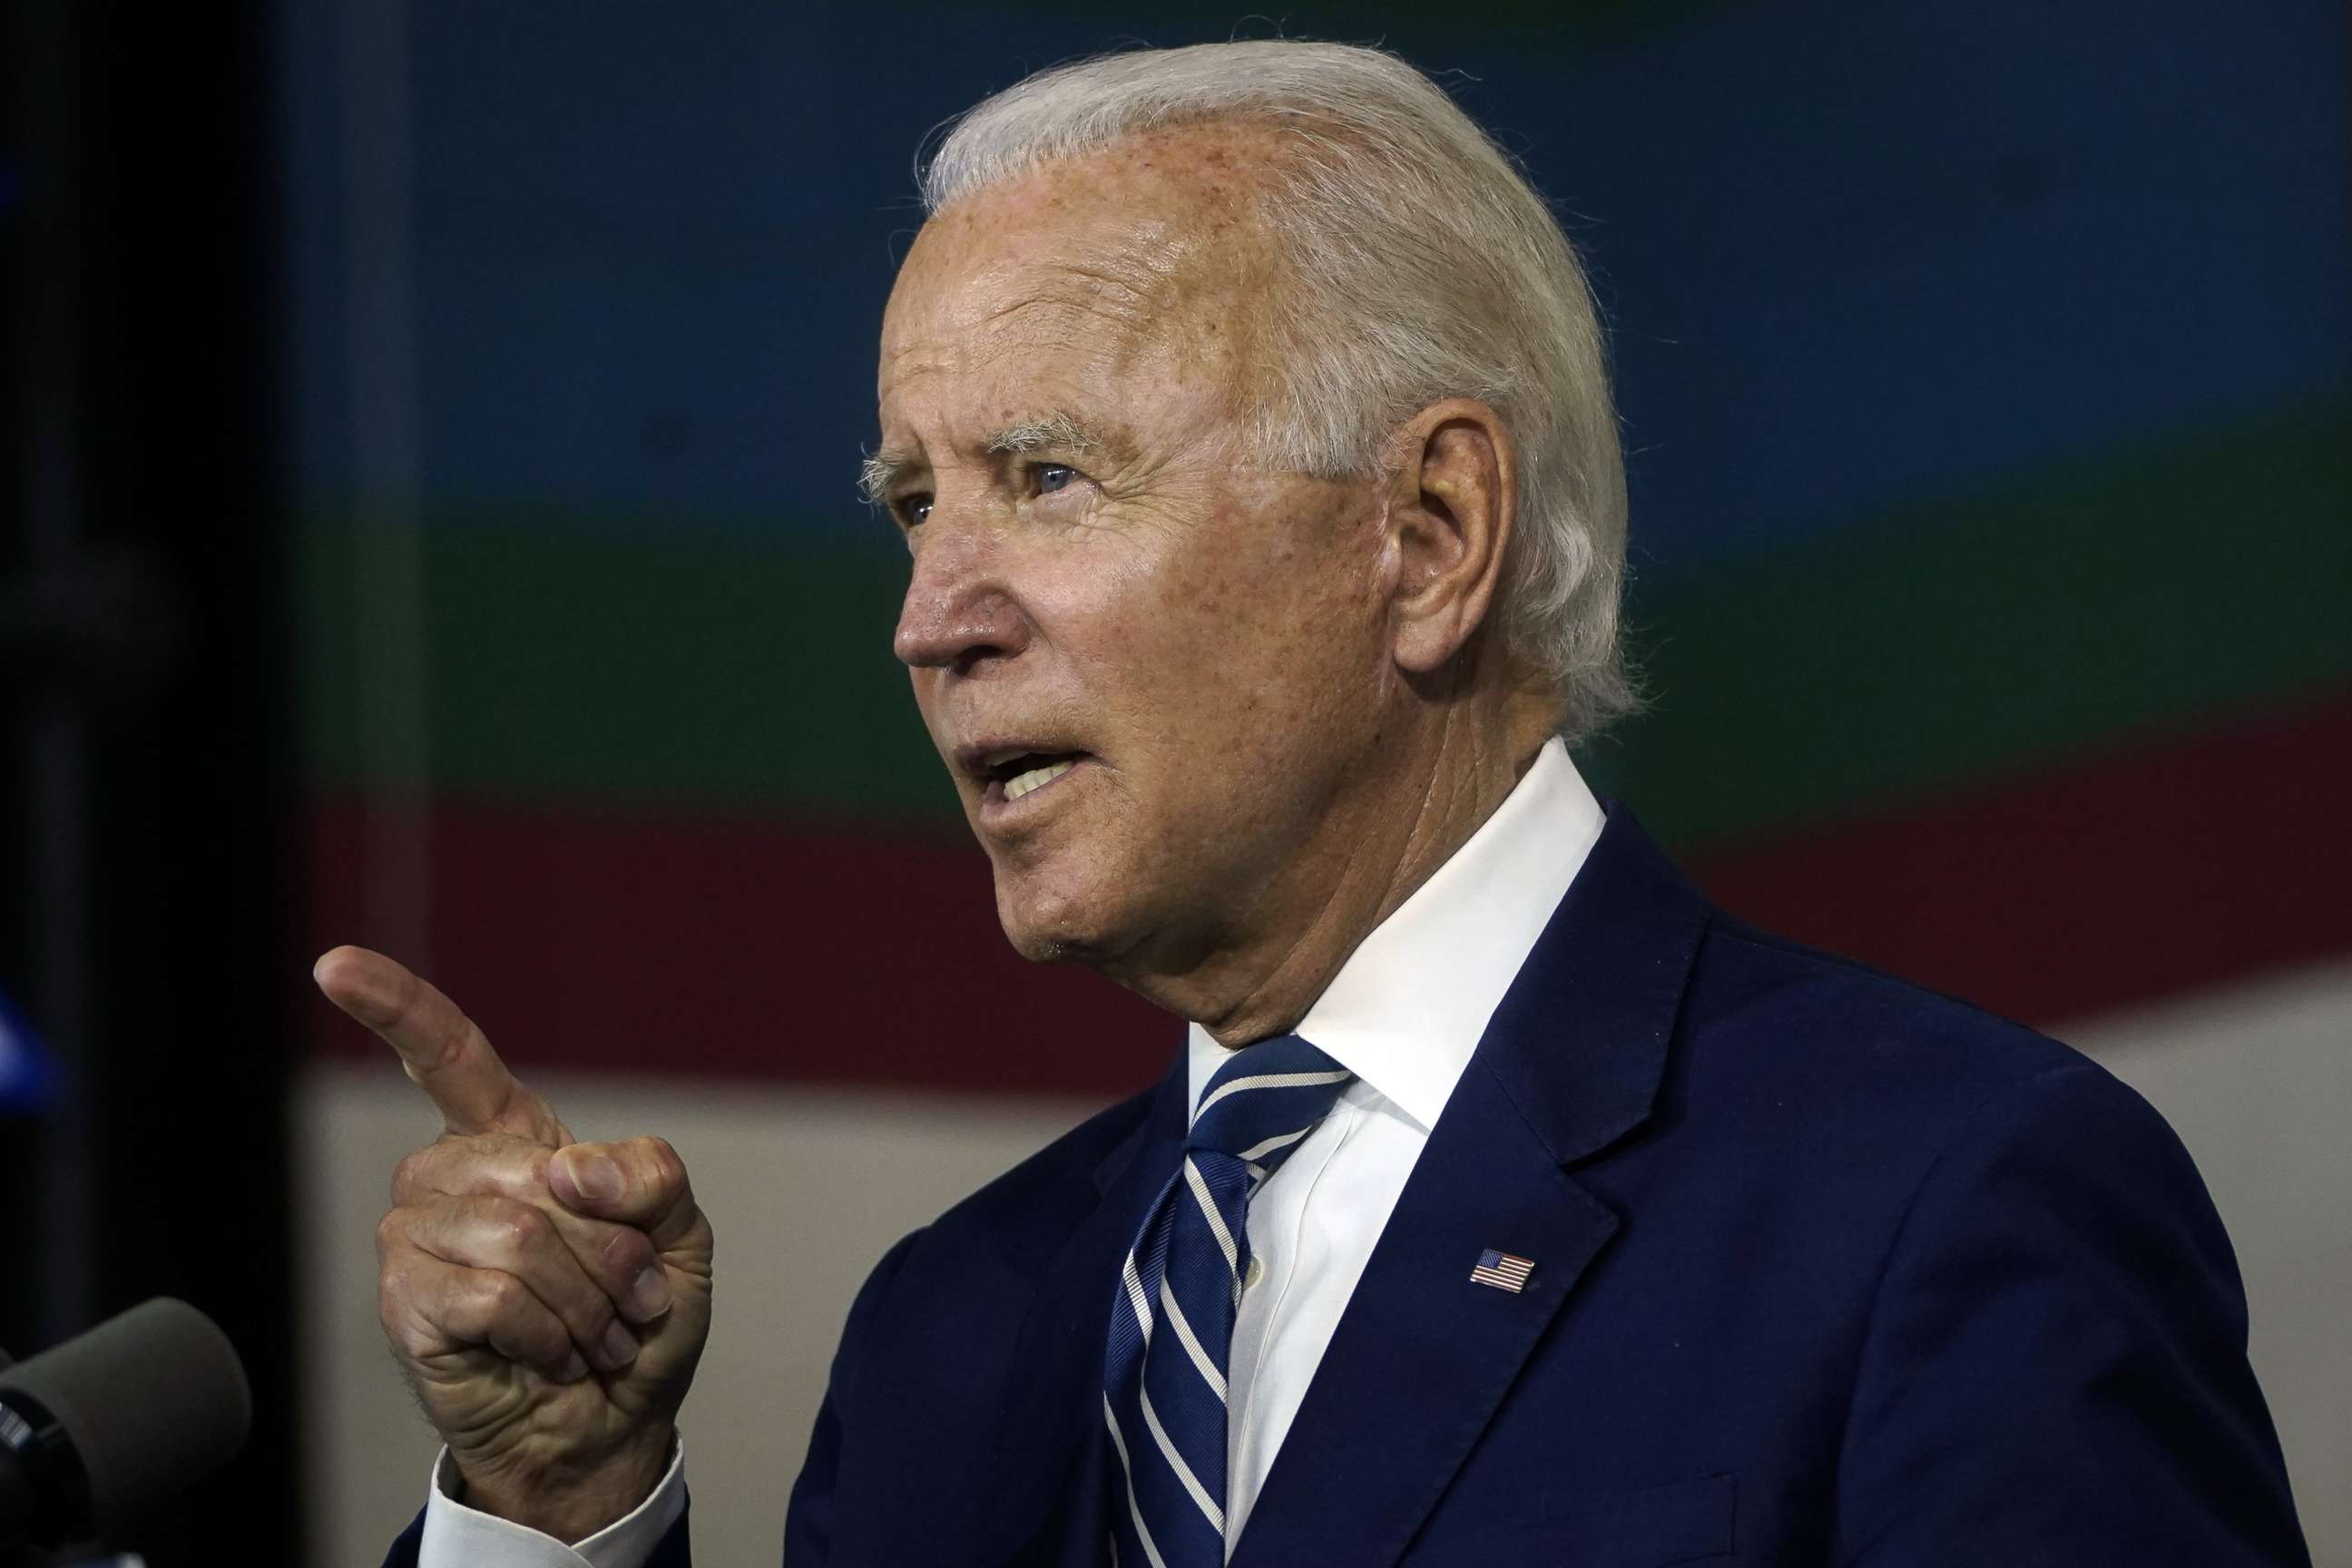 PHOTO: NEW CASTLE, DE - JULY 21: Democratic presidential candidate former Vice President Joe Biden speaks about economic recovery during a campaign event at Colonial Early Education Program at the Colwyck Center on July 21, 2020 in New Castle, Delaware. 